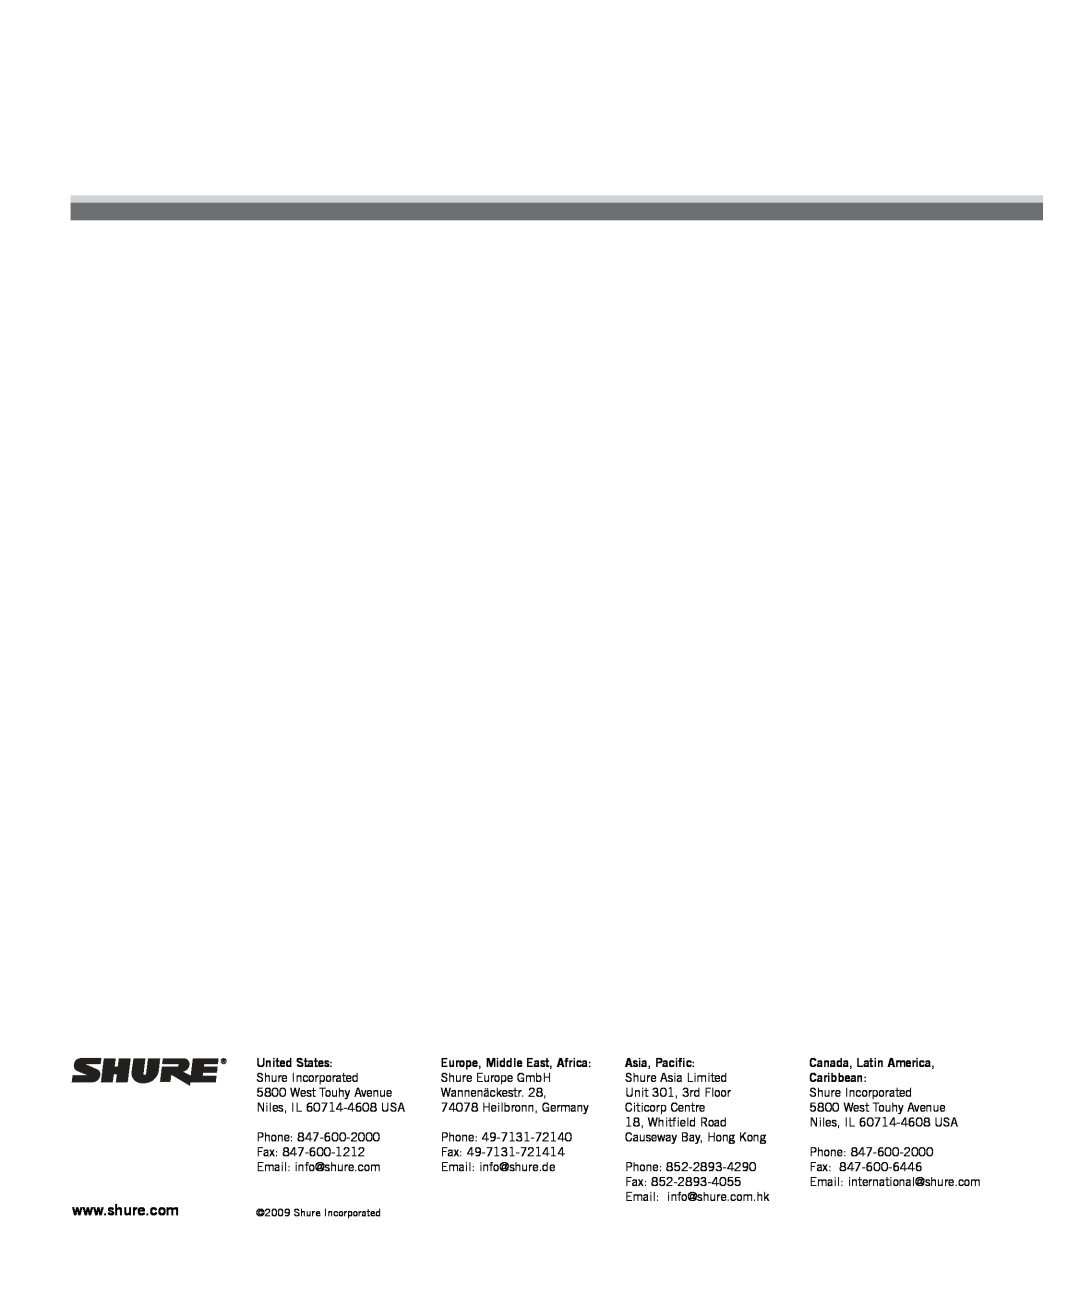 Shure SRH240 manual United States, Europe, Middle East, Africa, Asia, Pacific, Canada, Latin America, Caribbean 